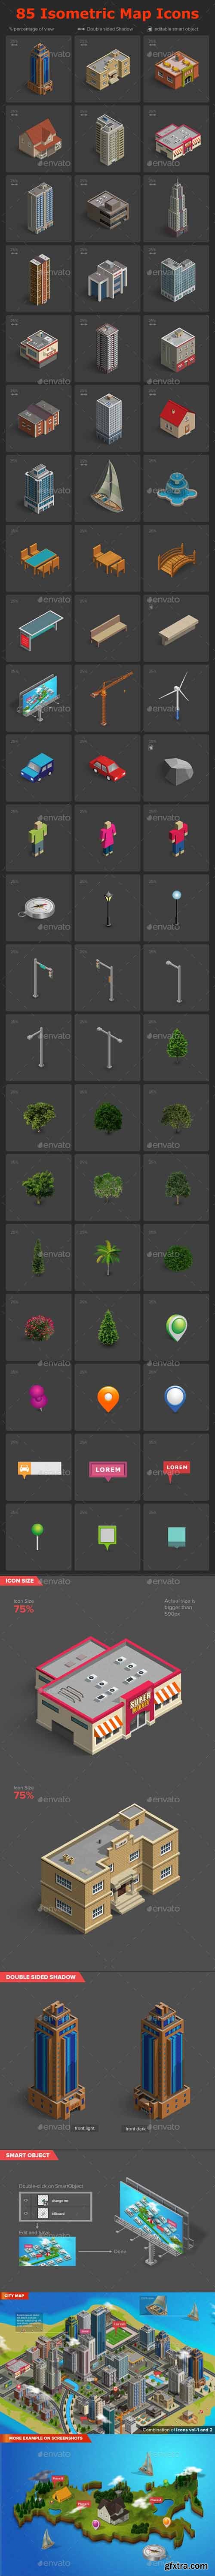 Graphicriver - Isometric Map Icons Vol.02 17979944